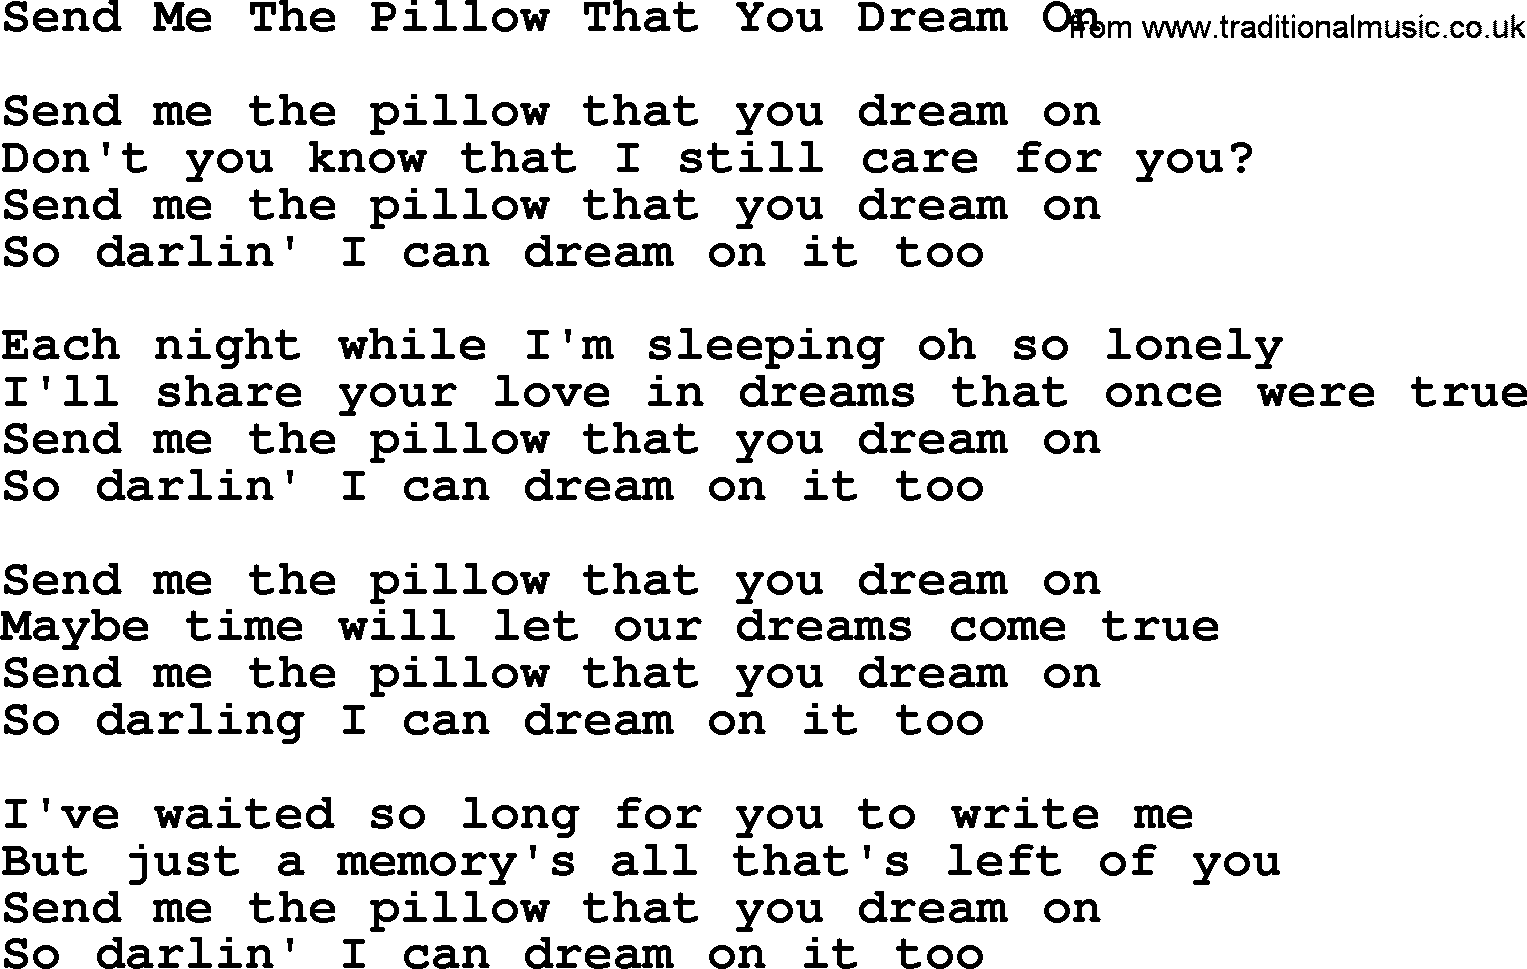 Willie Nelson song: Send Me The Pillow That You Dream On lyrics